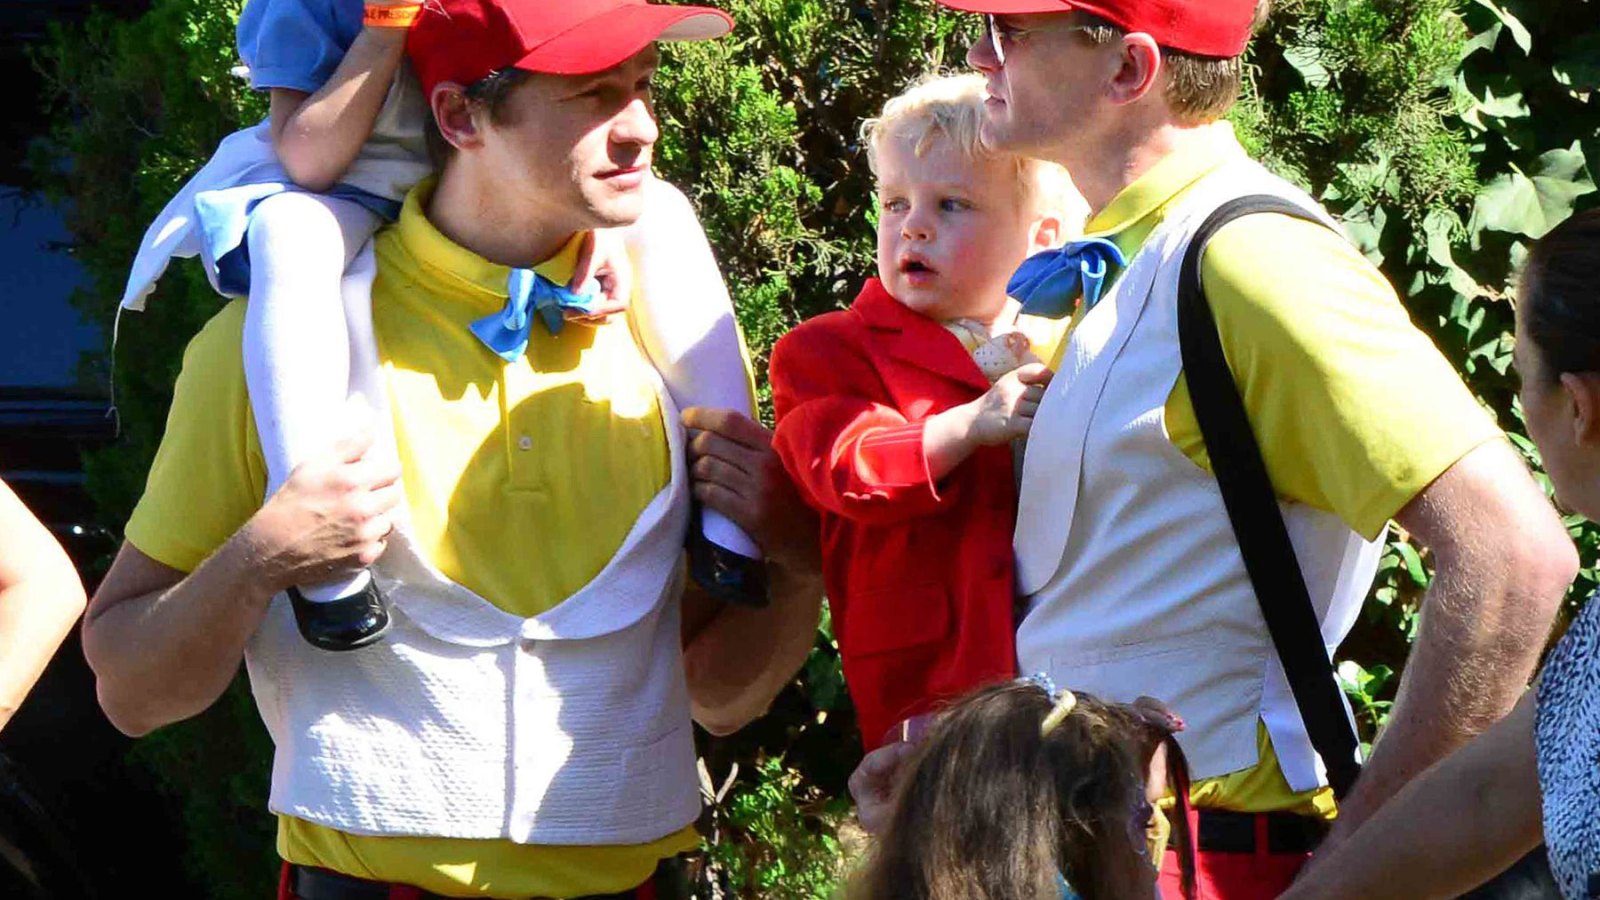 Neil Patrick Harris and his family